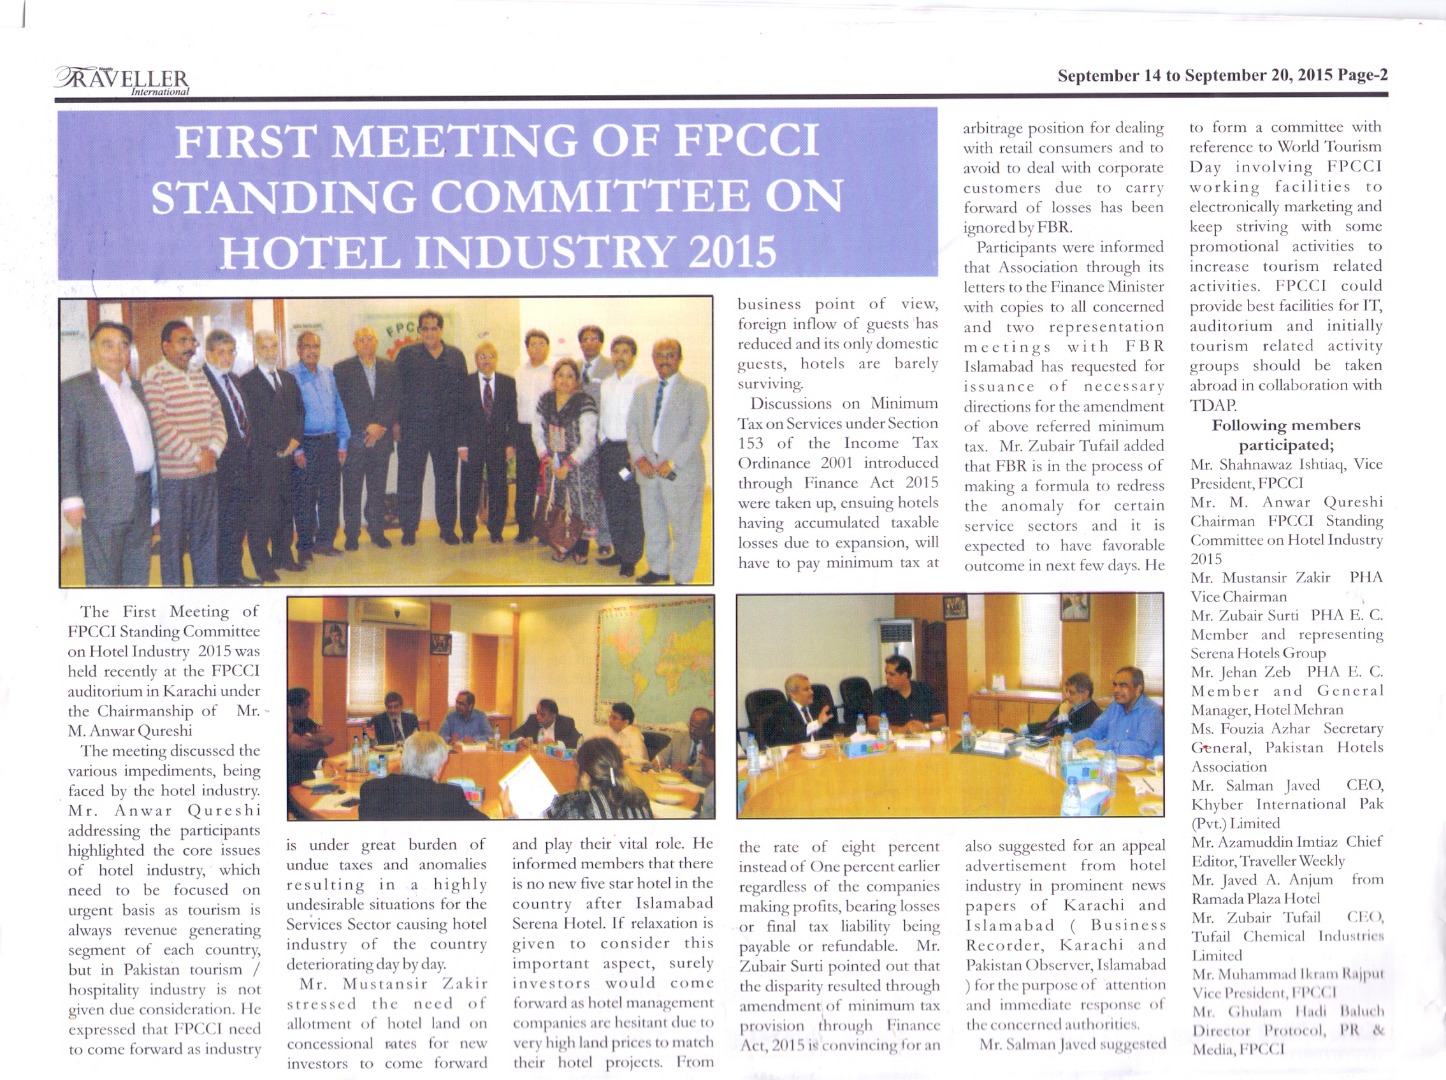 PHA held FPCCI Standing Committee on Hotel Industry Meeting on 3rd September, 2015 at FPCCI, Karachi